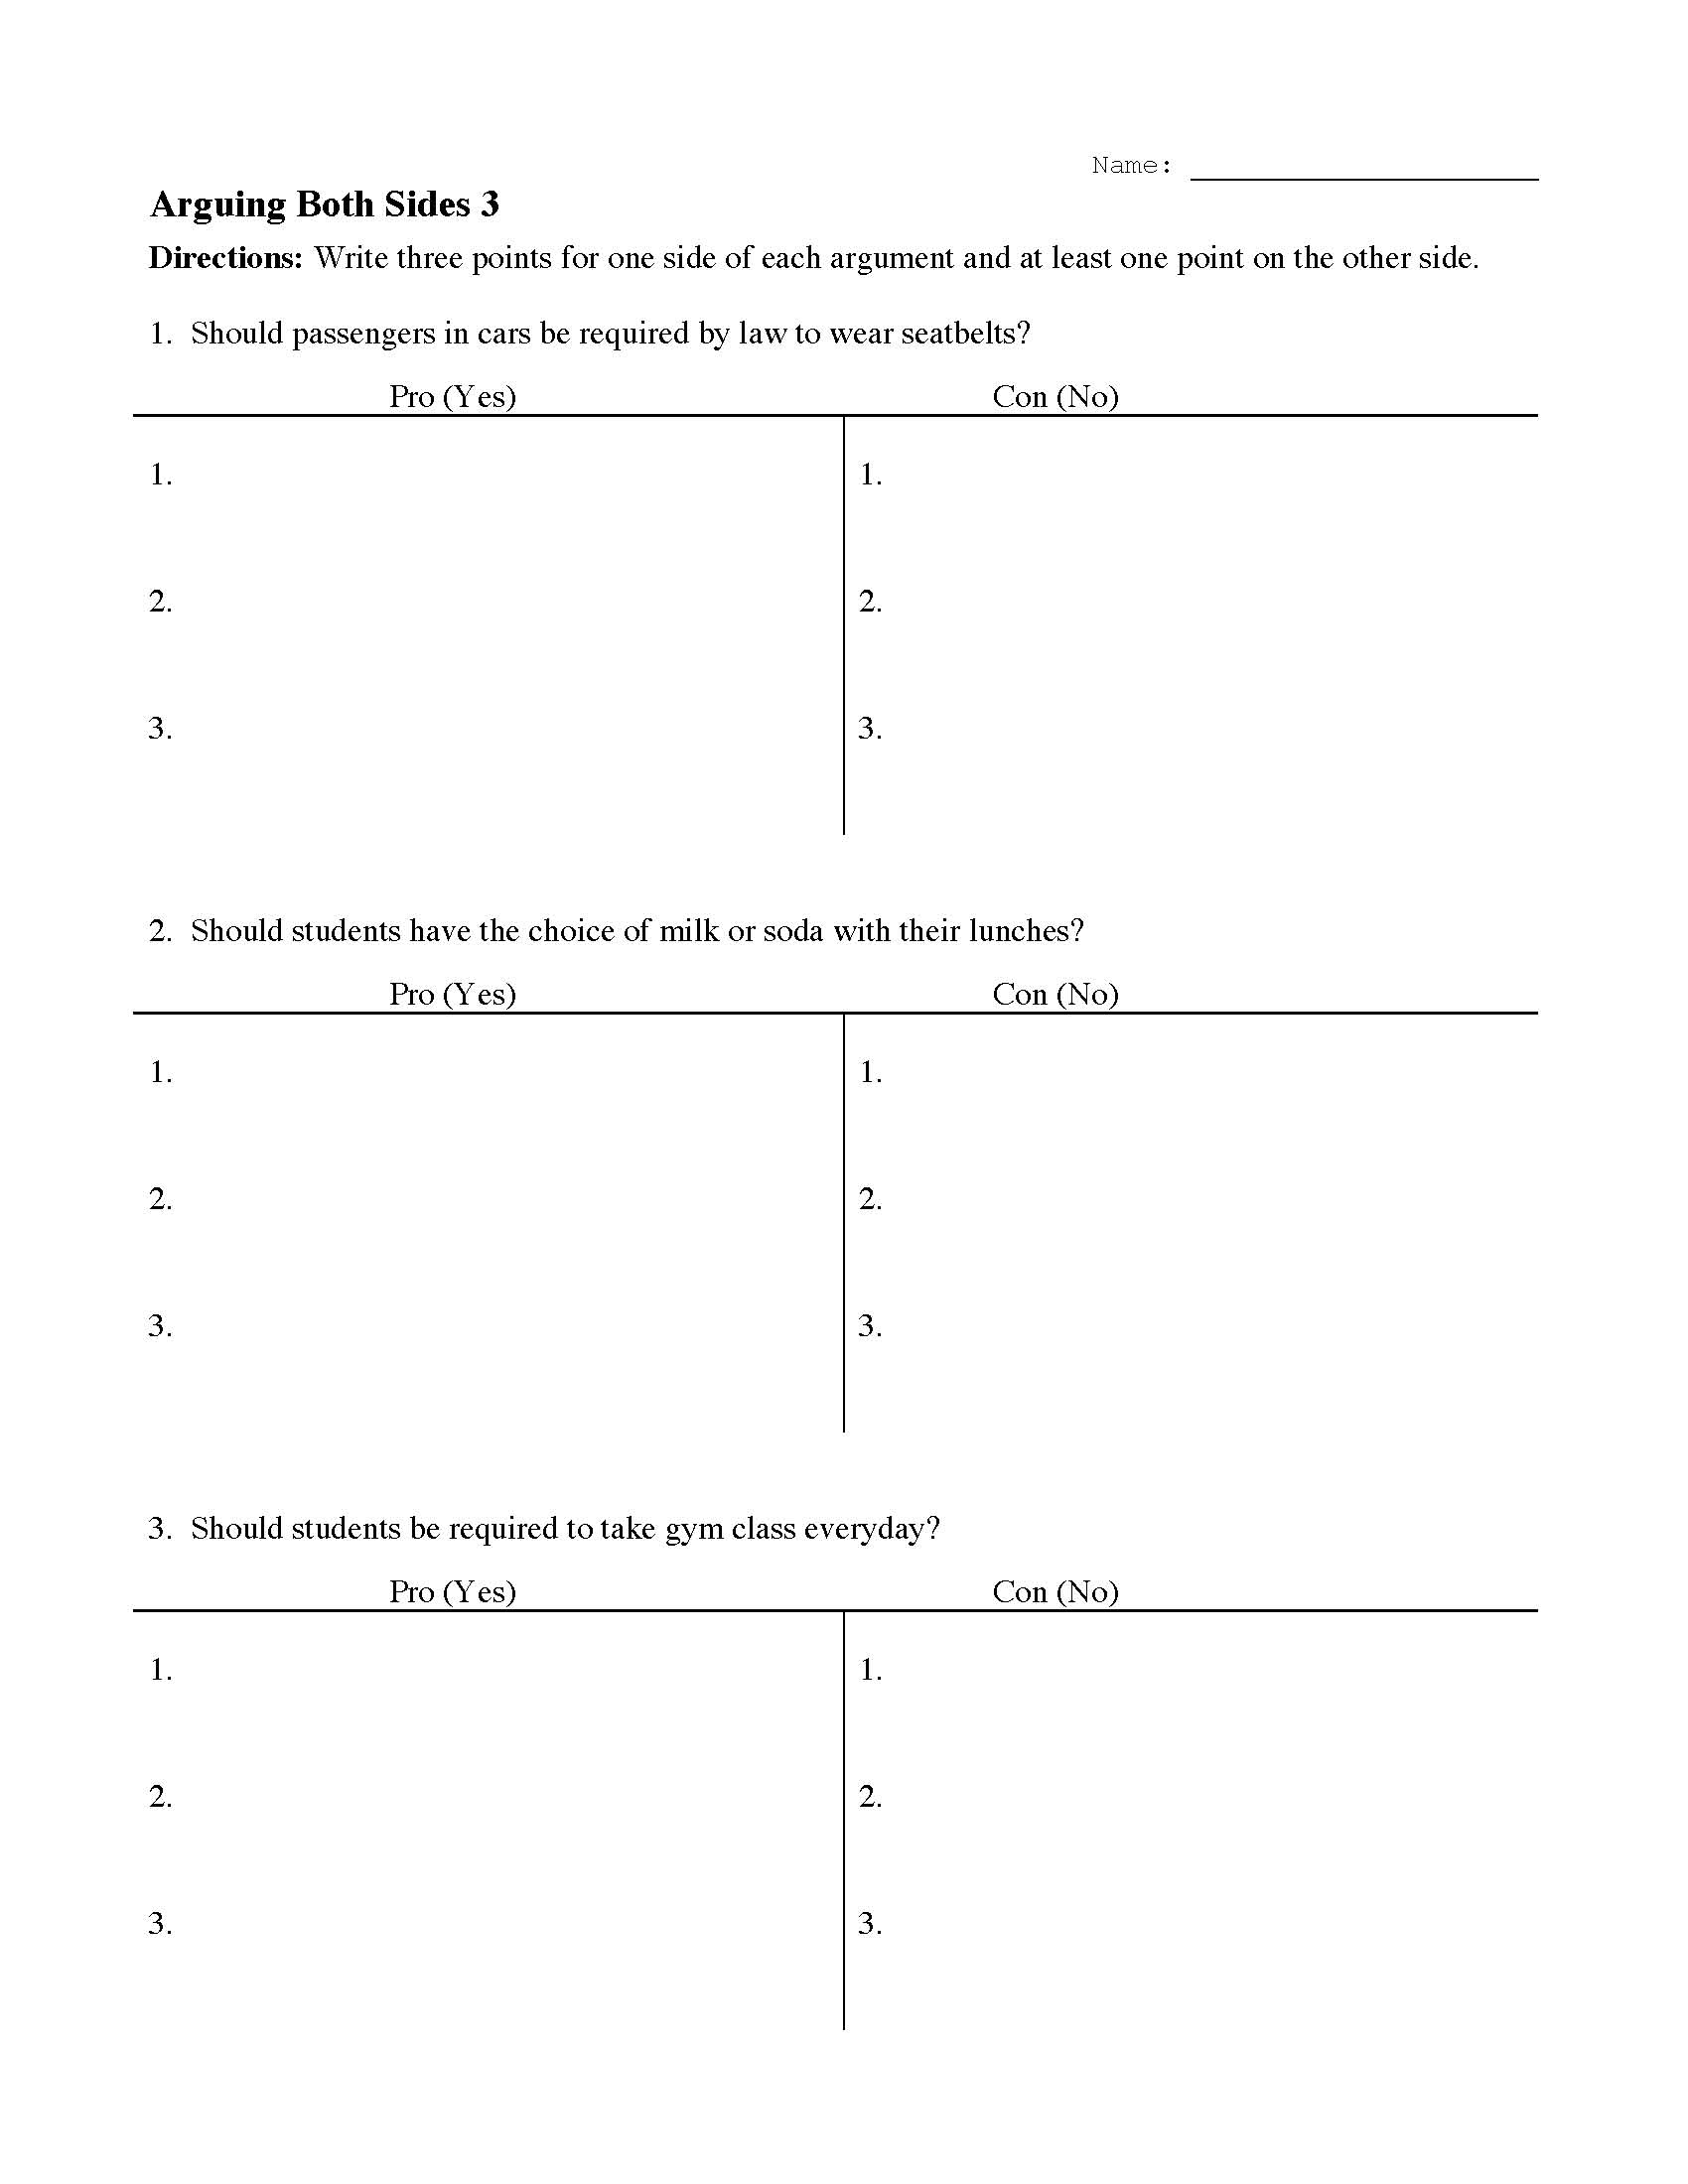 This is a preview image of the Arguing Both Sides Worksheet 3.